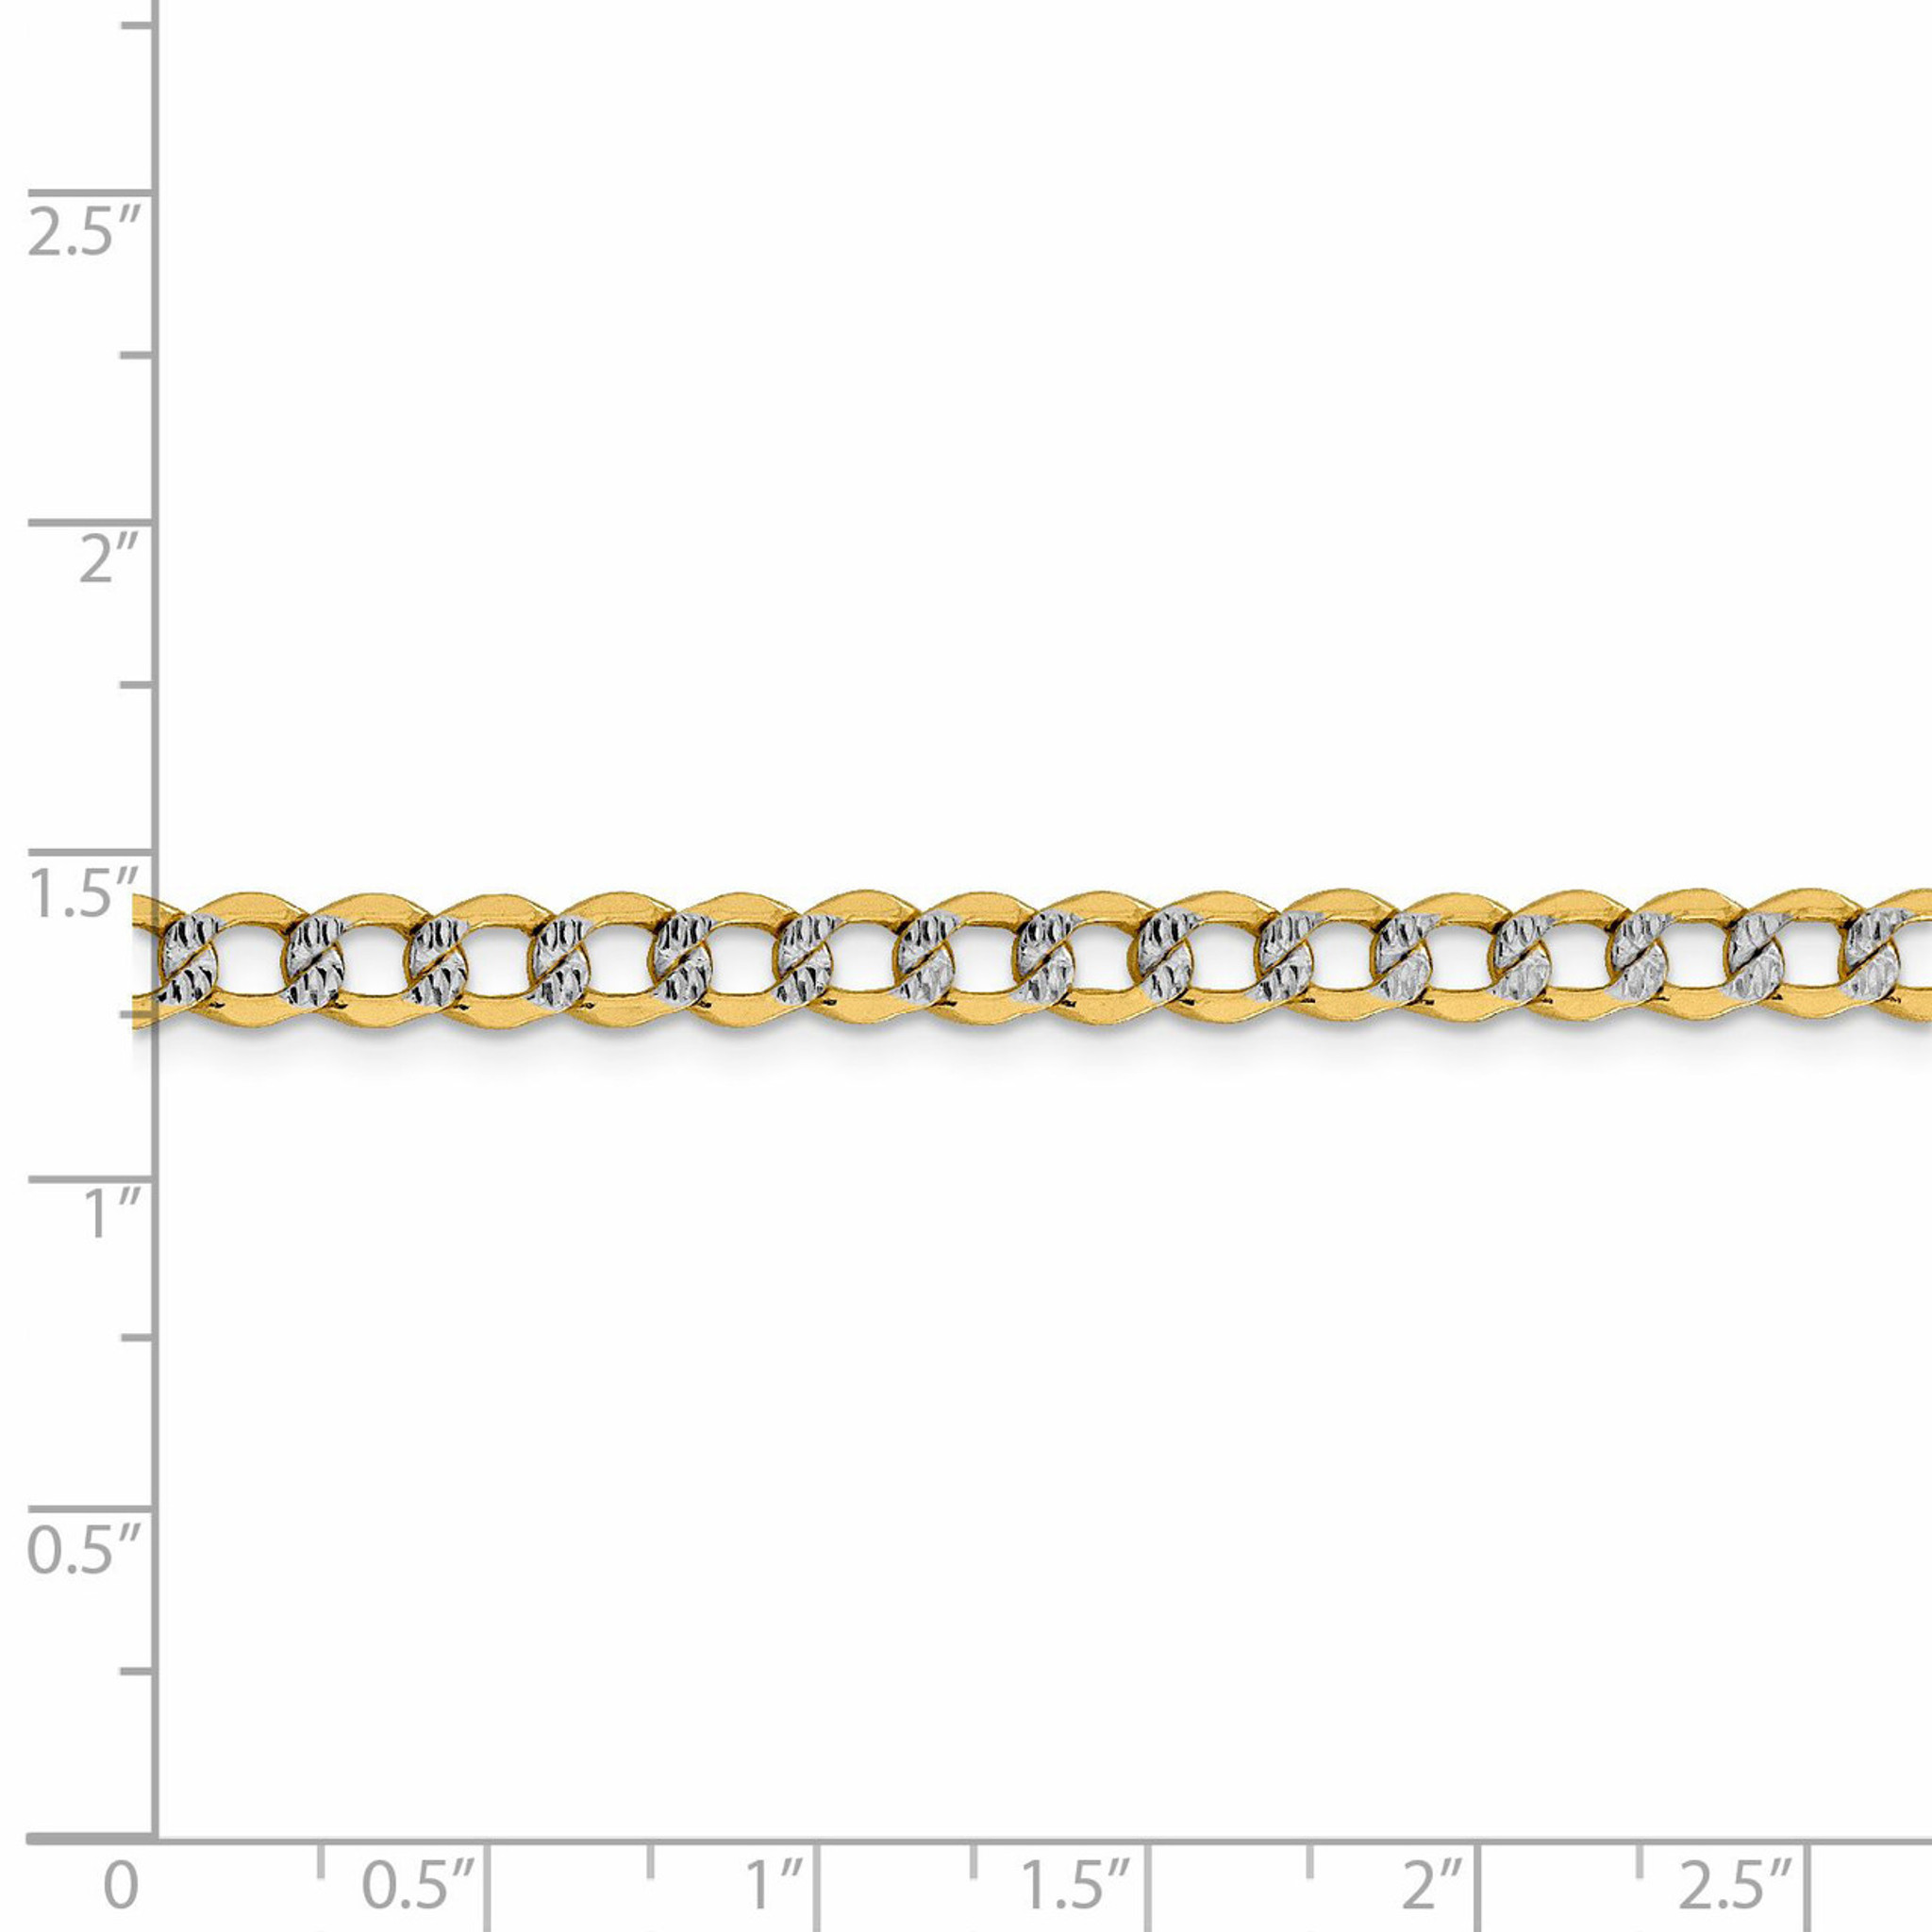 20 Inch 5.2mm Semi-solid Pave Curb Chain 14k Gold & Rhodium PWF120-20